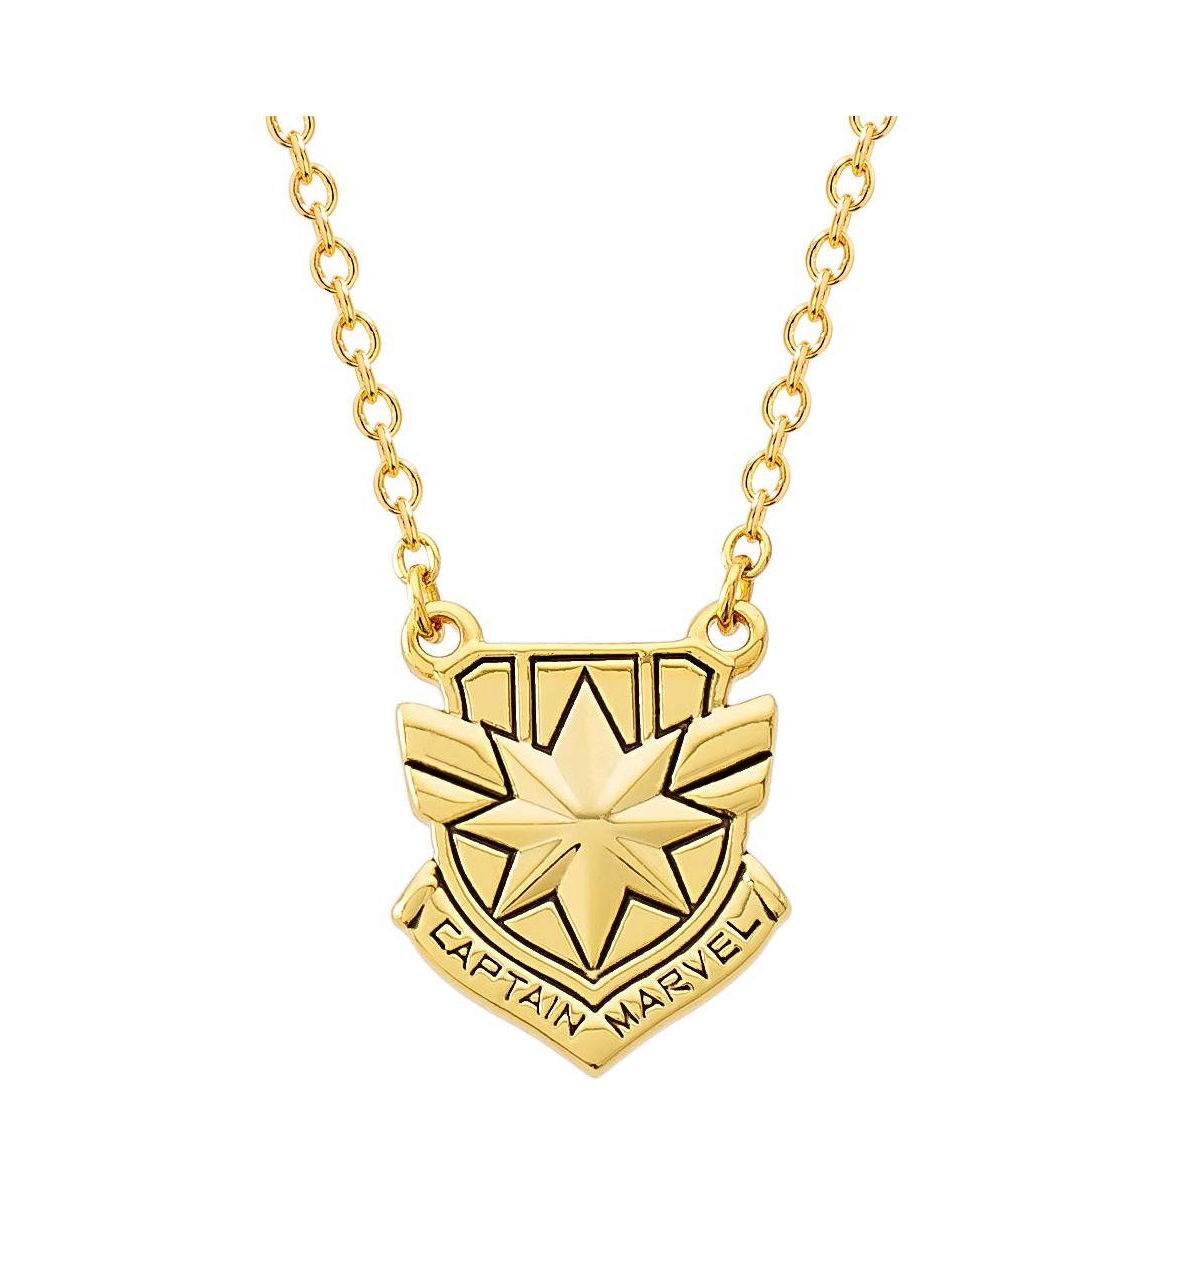 s Captain Shield Yellow Gold Plated Necklace, 18" chain - Gold tone